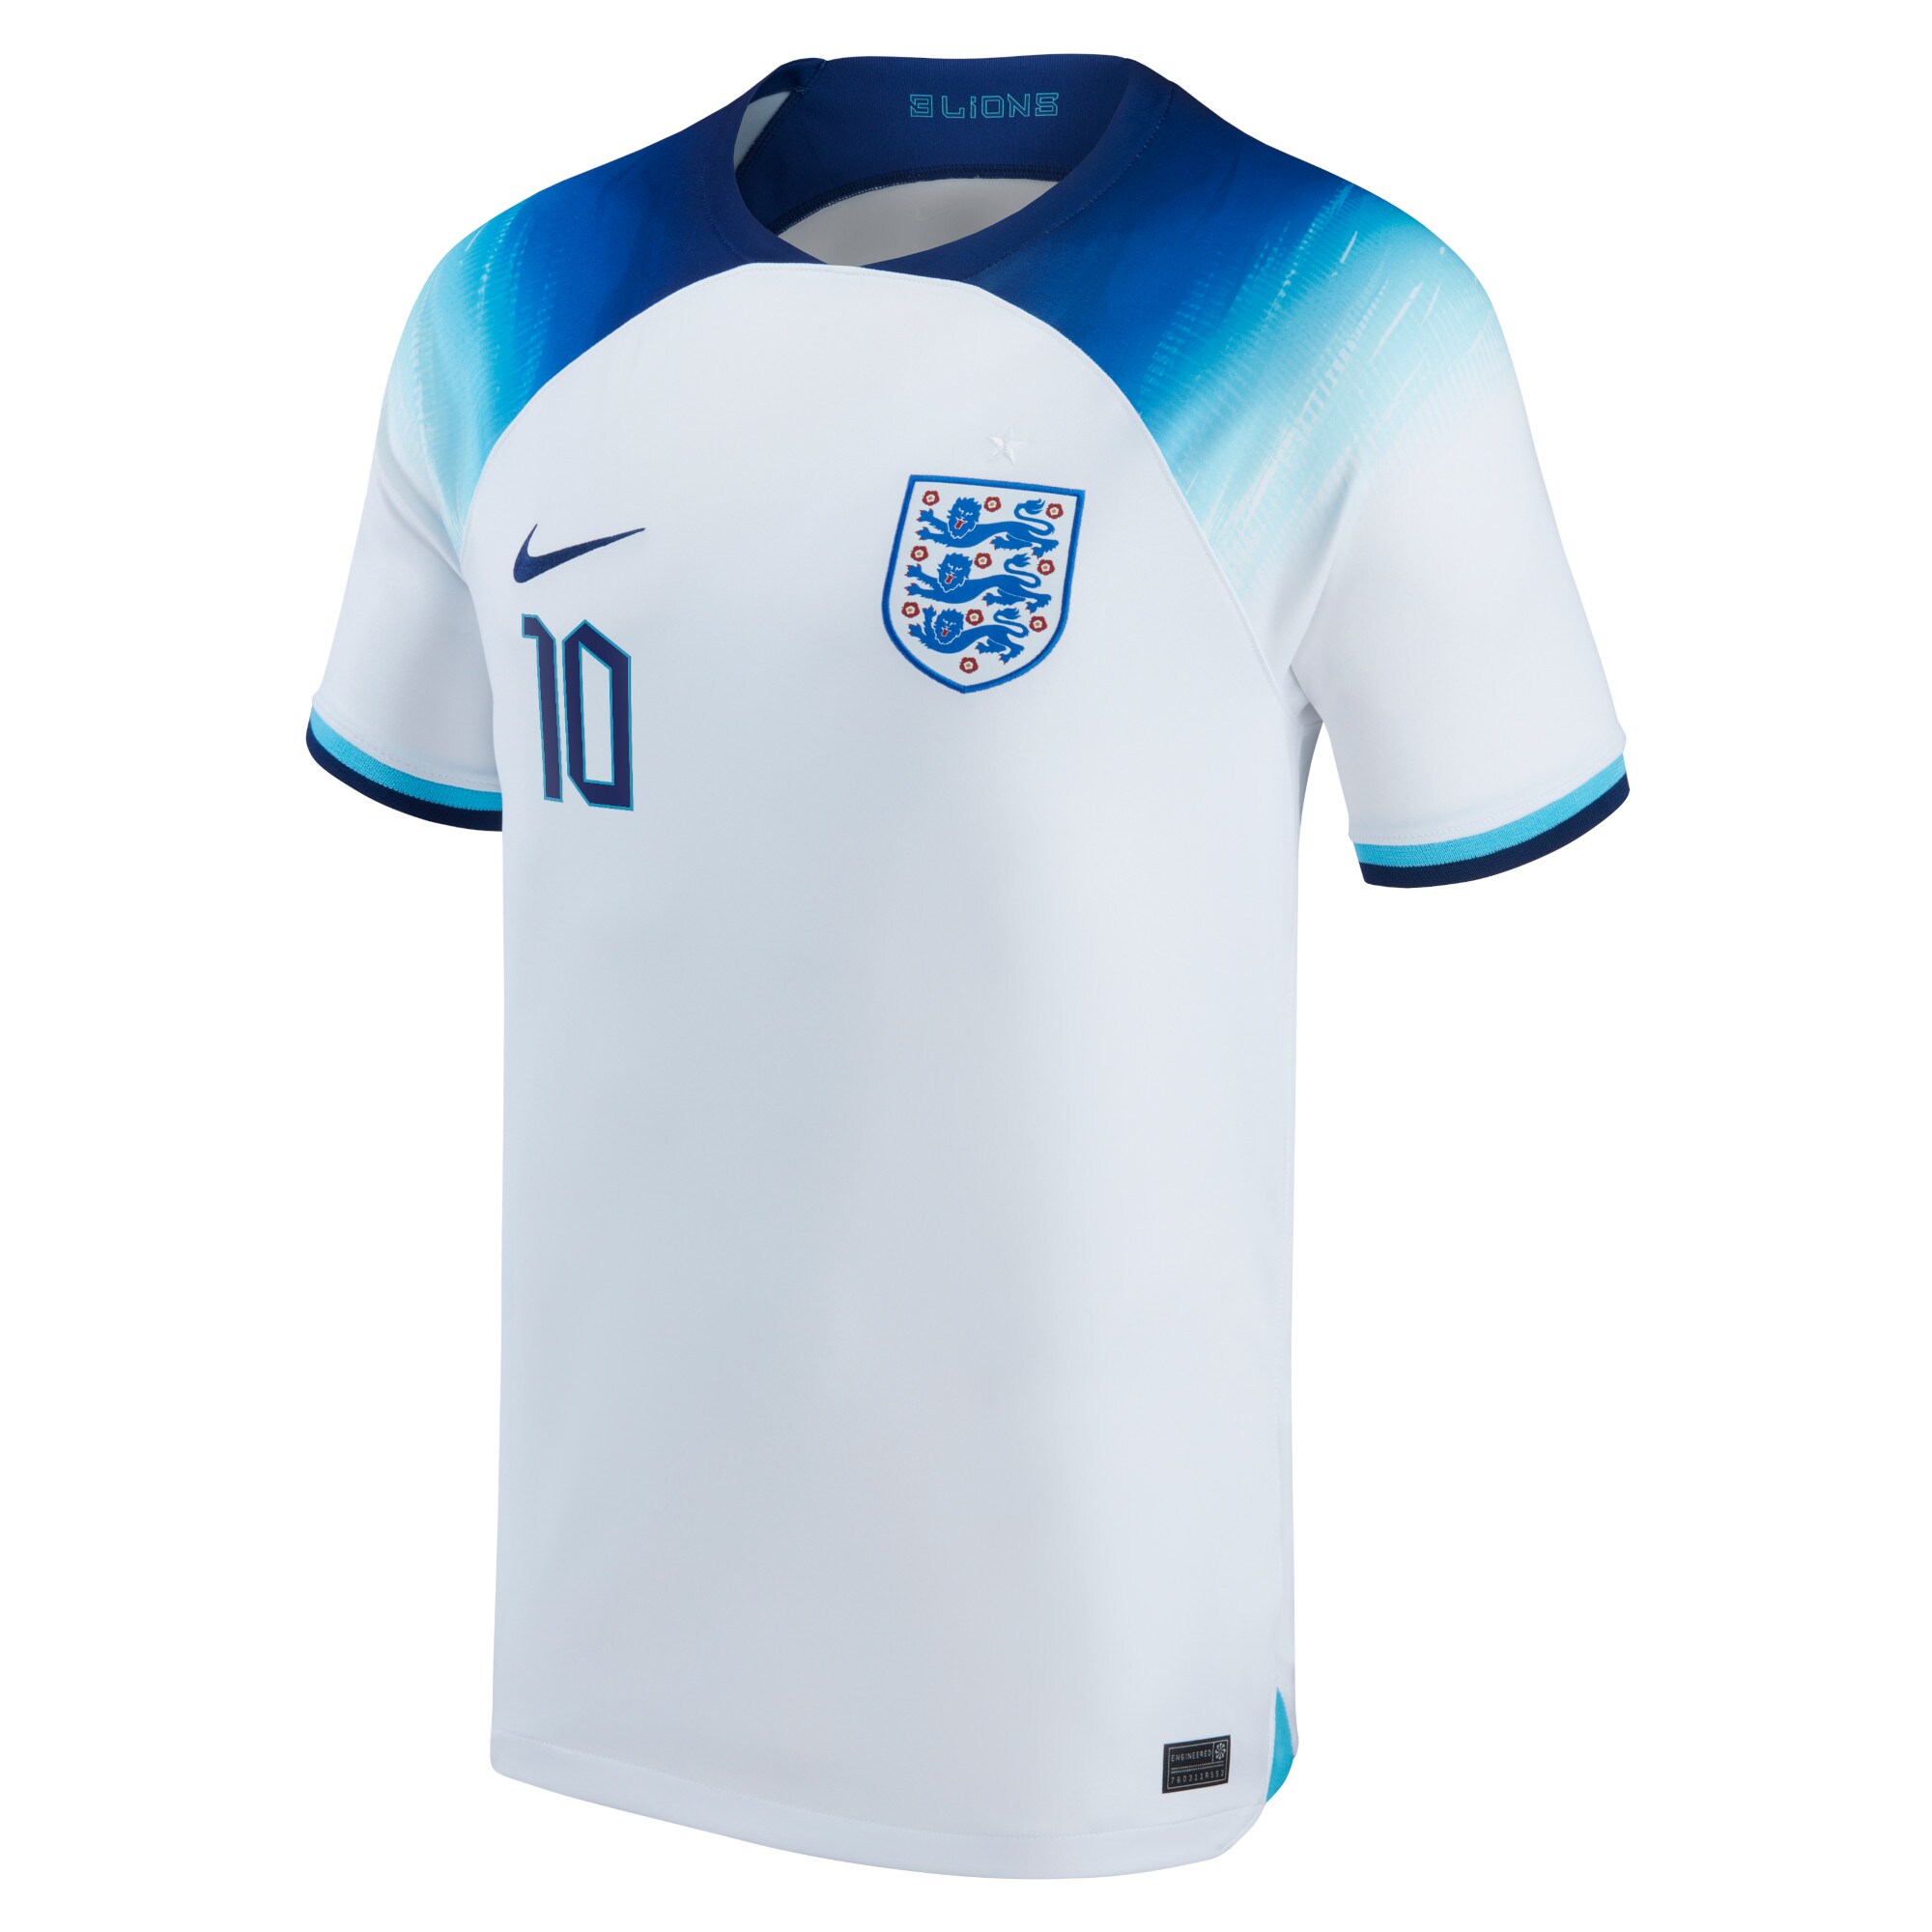 England Home Stadium Shirt 2022 with Sterling 10 printing